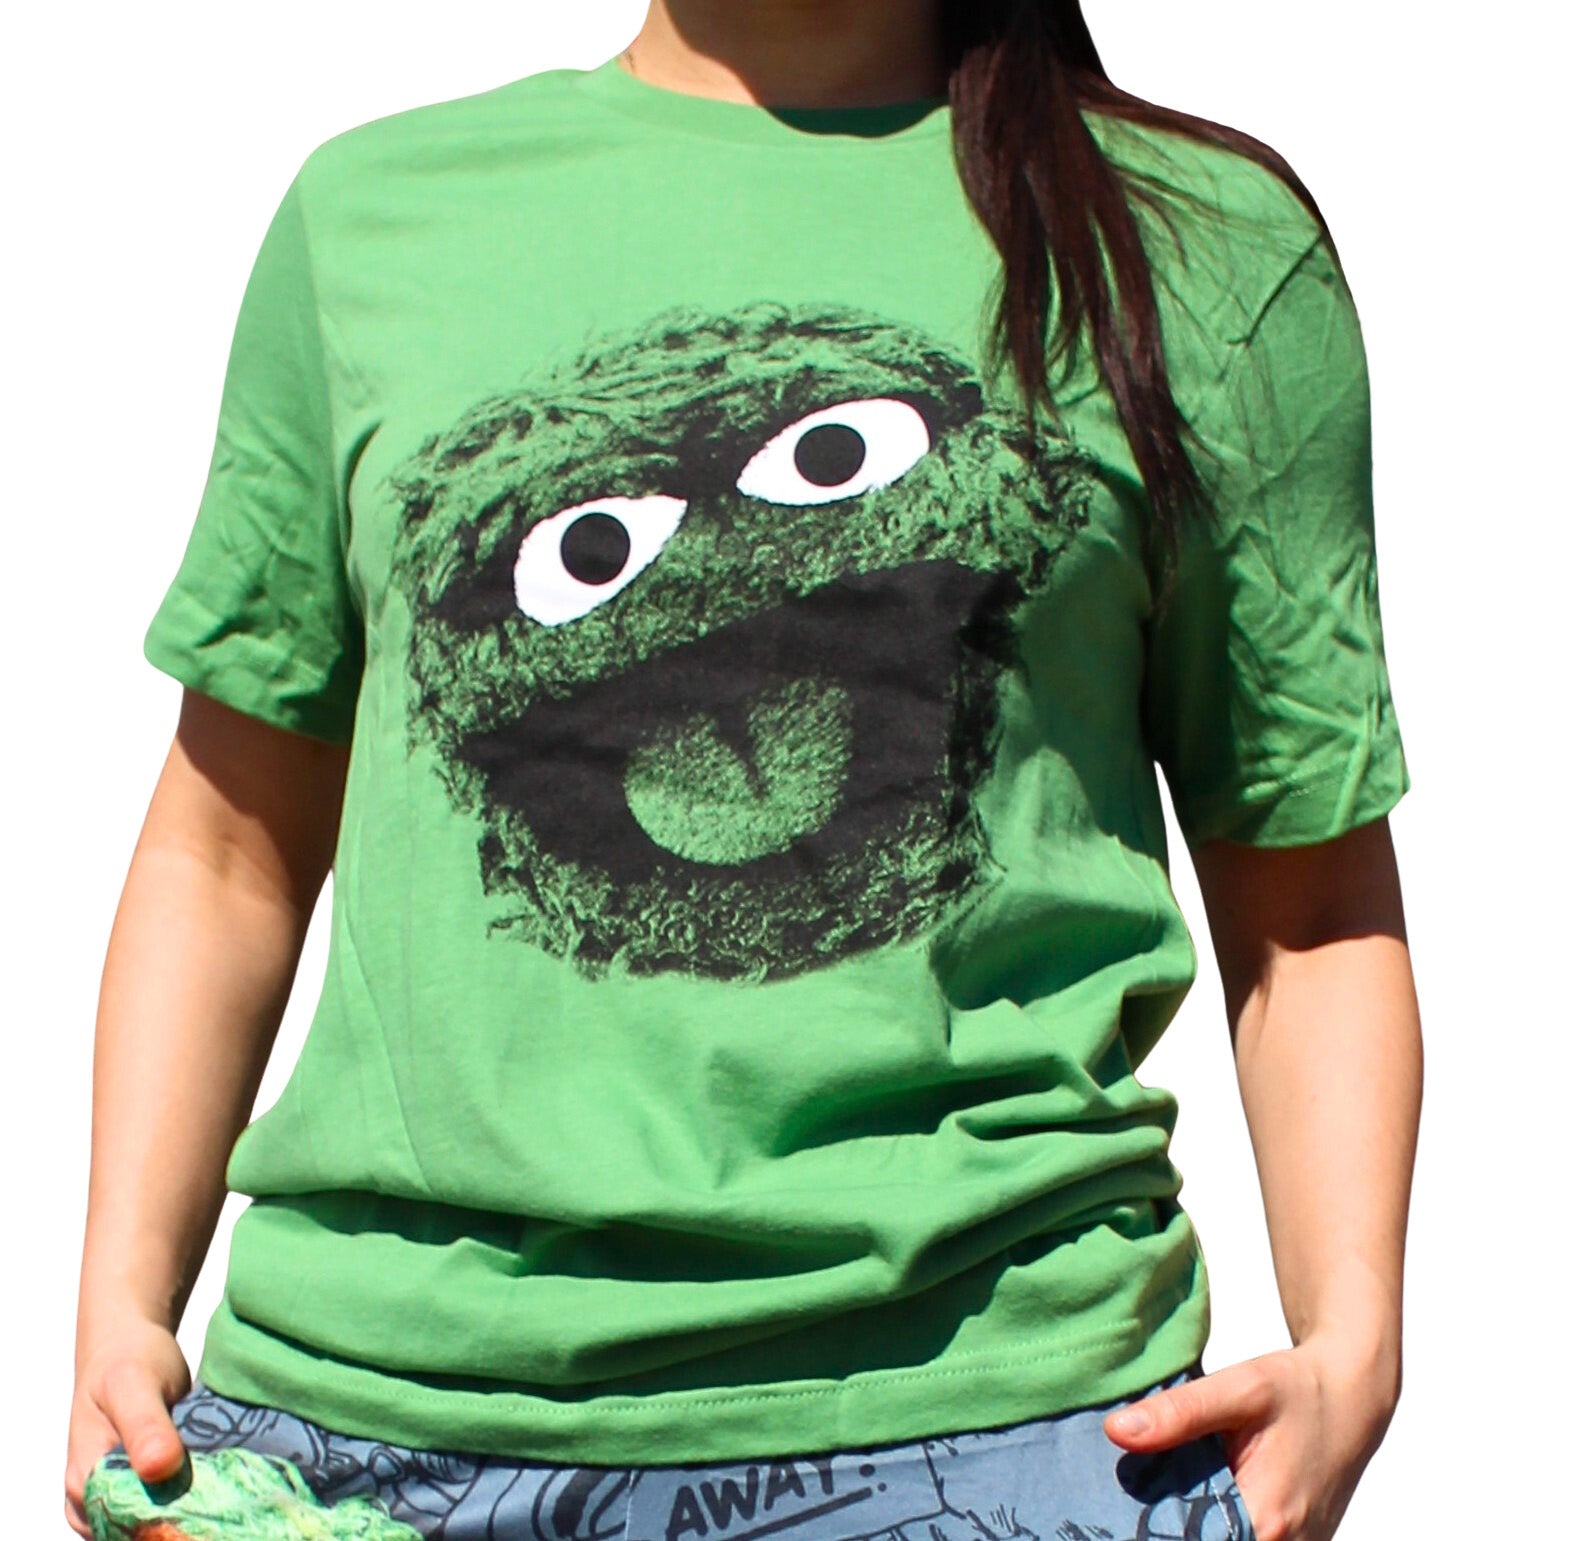 Sesame Street Oscar The Grouch shirt on model front view